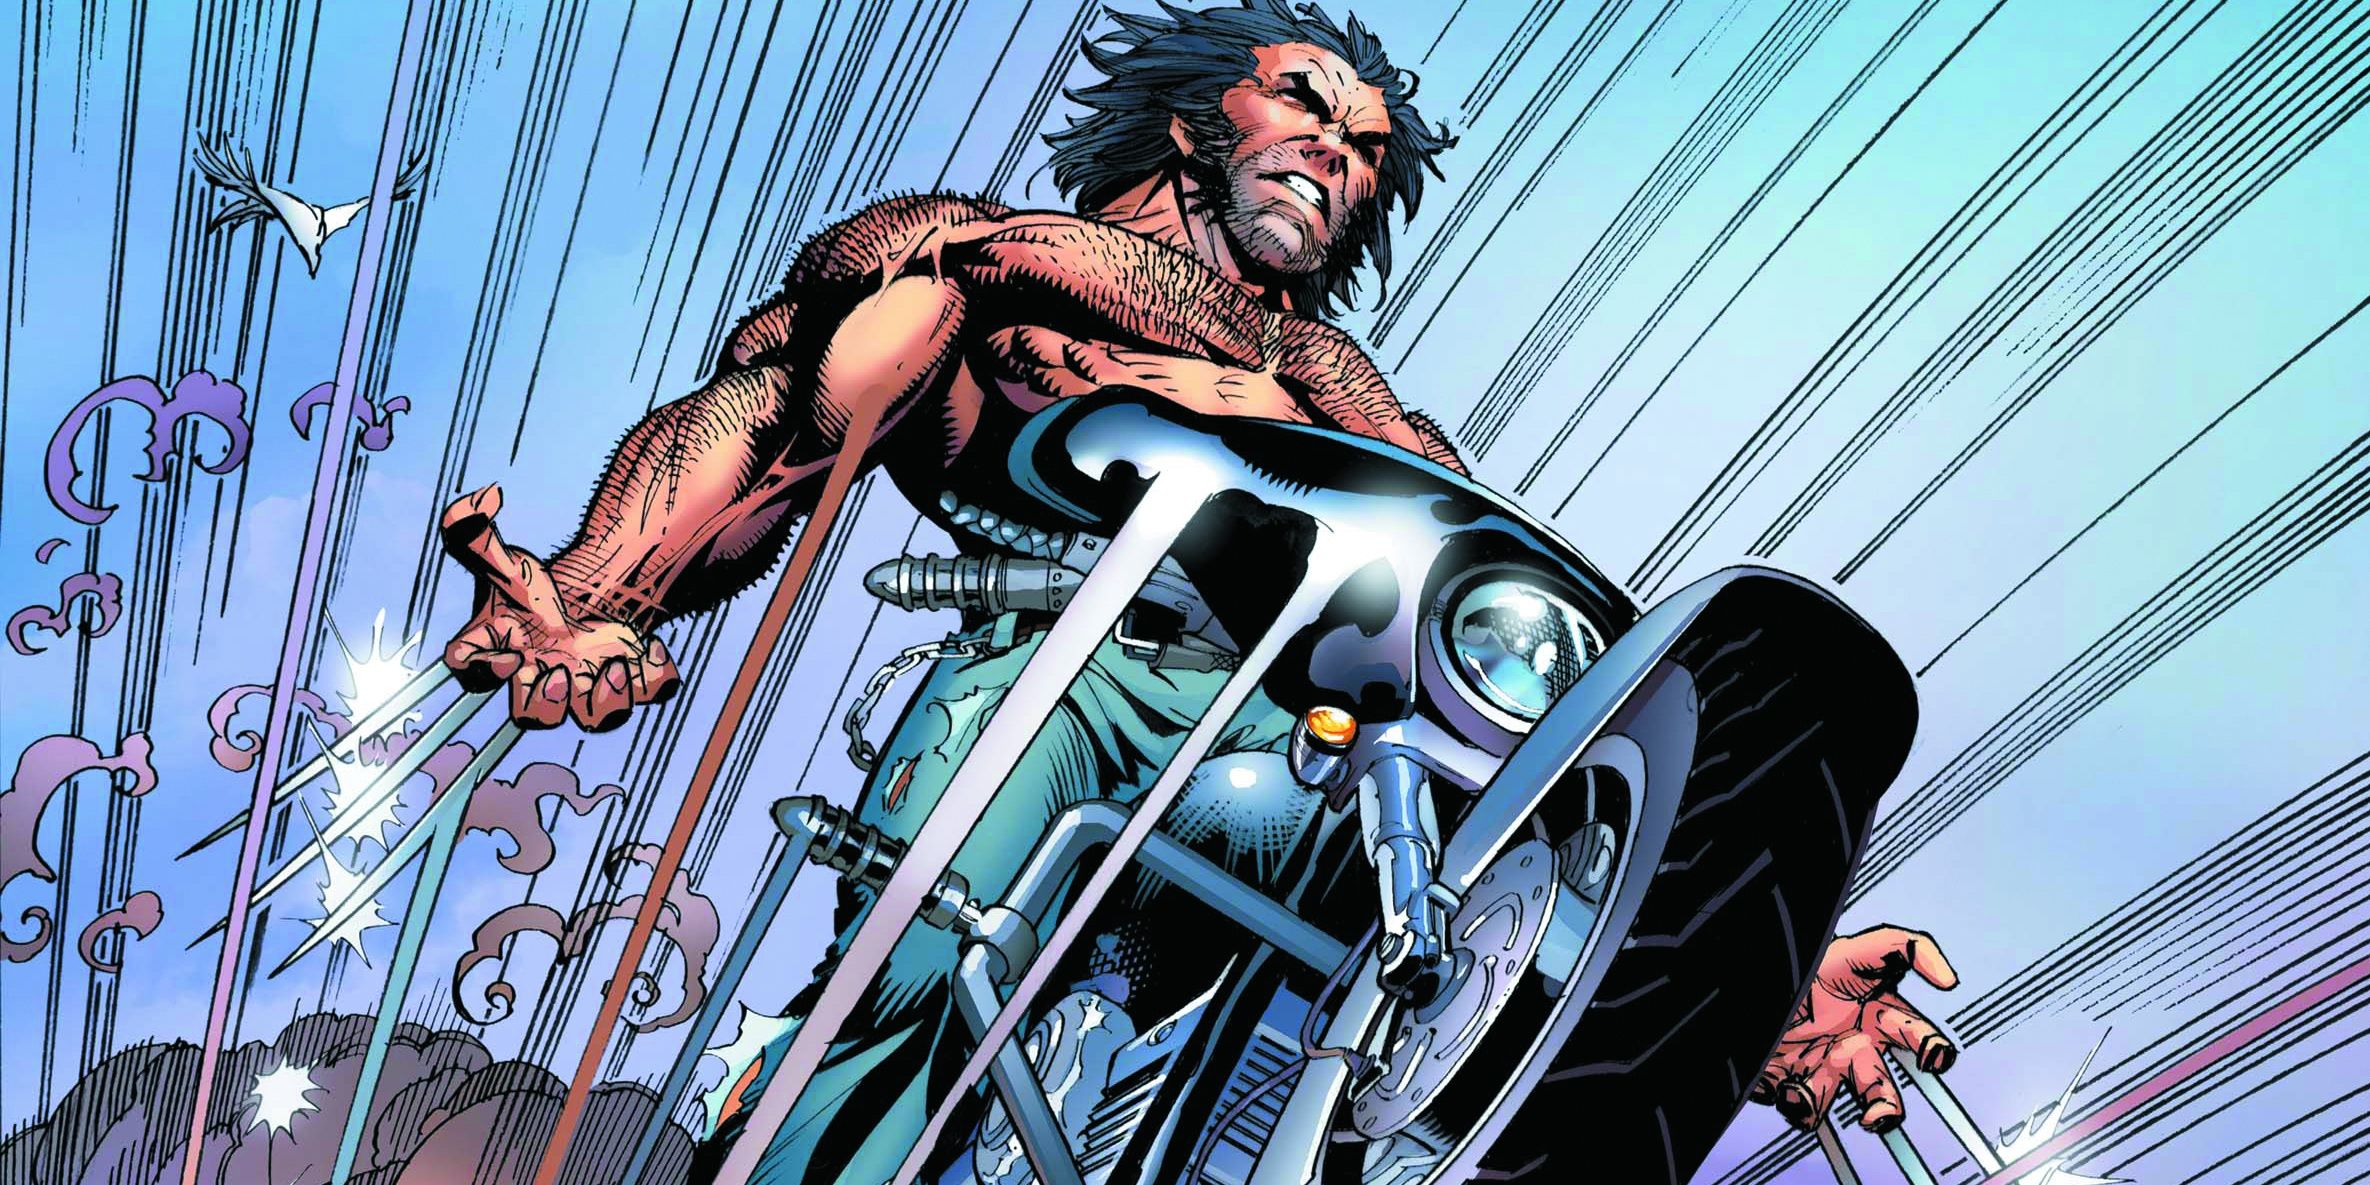 Marvel Comics' Wolverine's rides his motorcycle standing up, claws popped out and ready to slash, in Marvel Comics